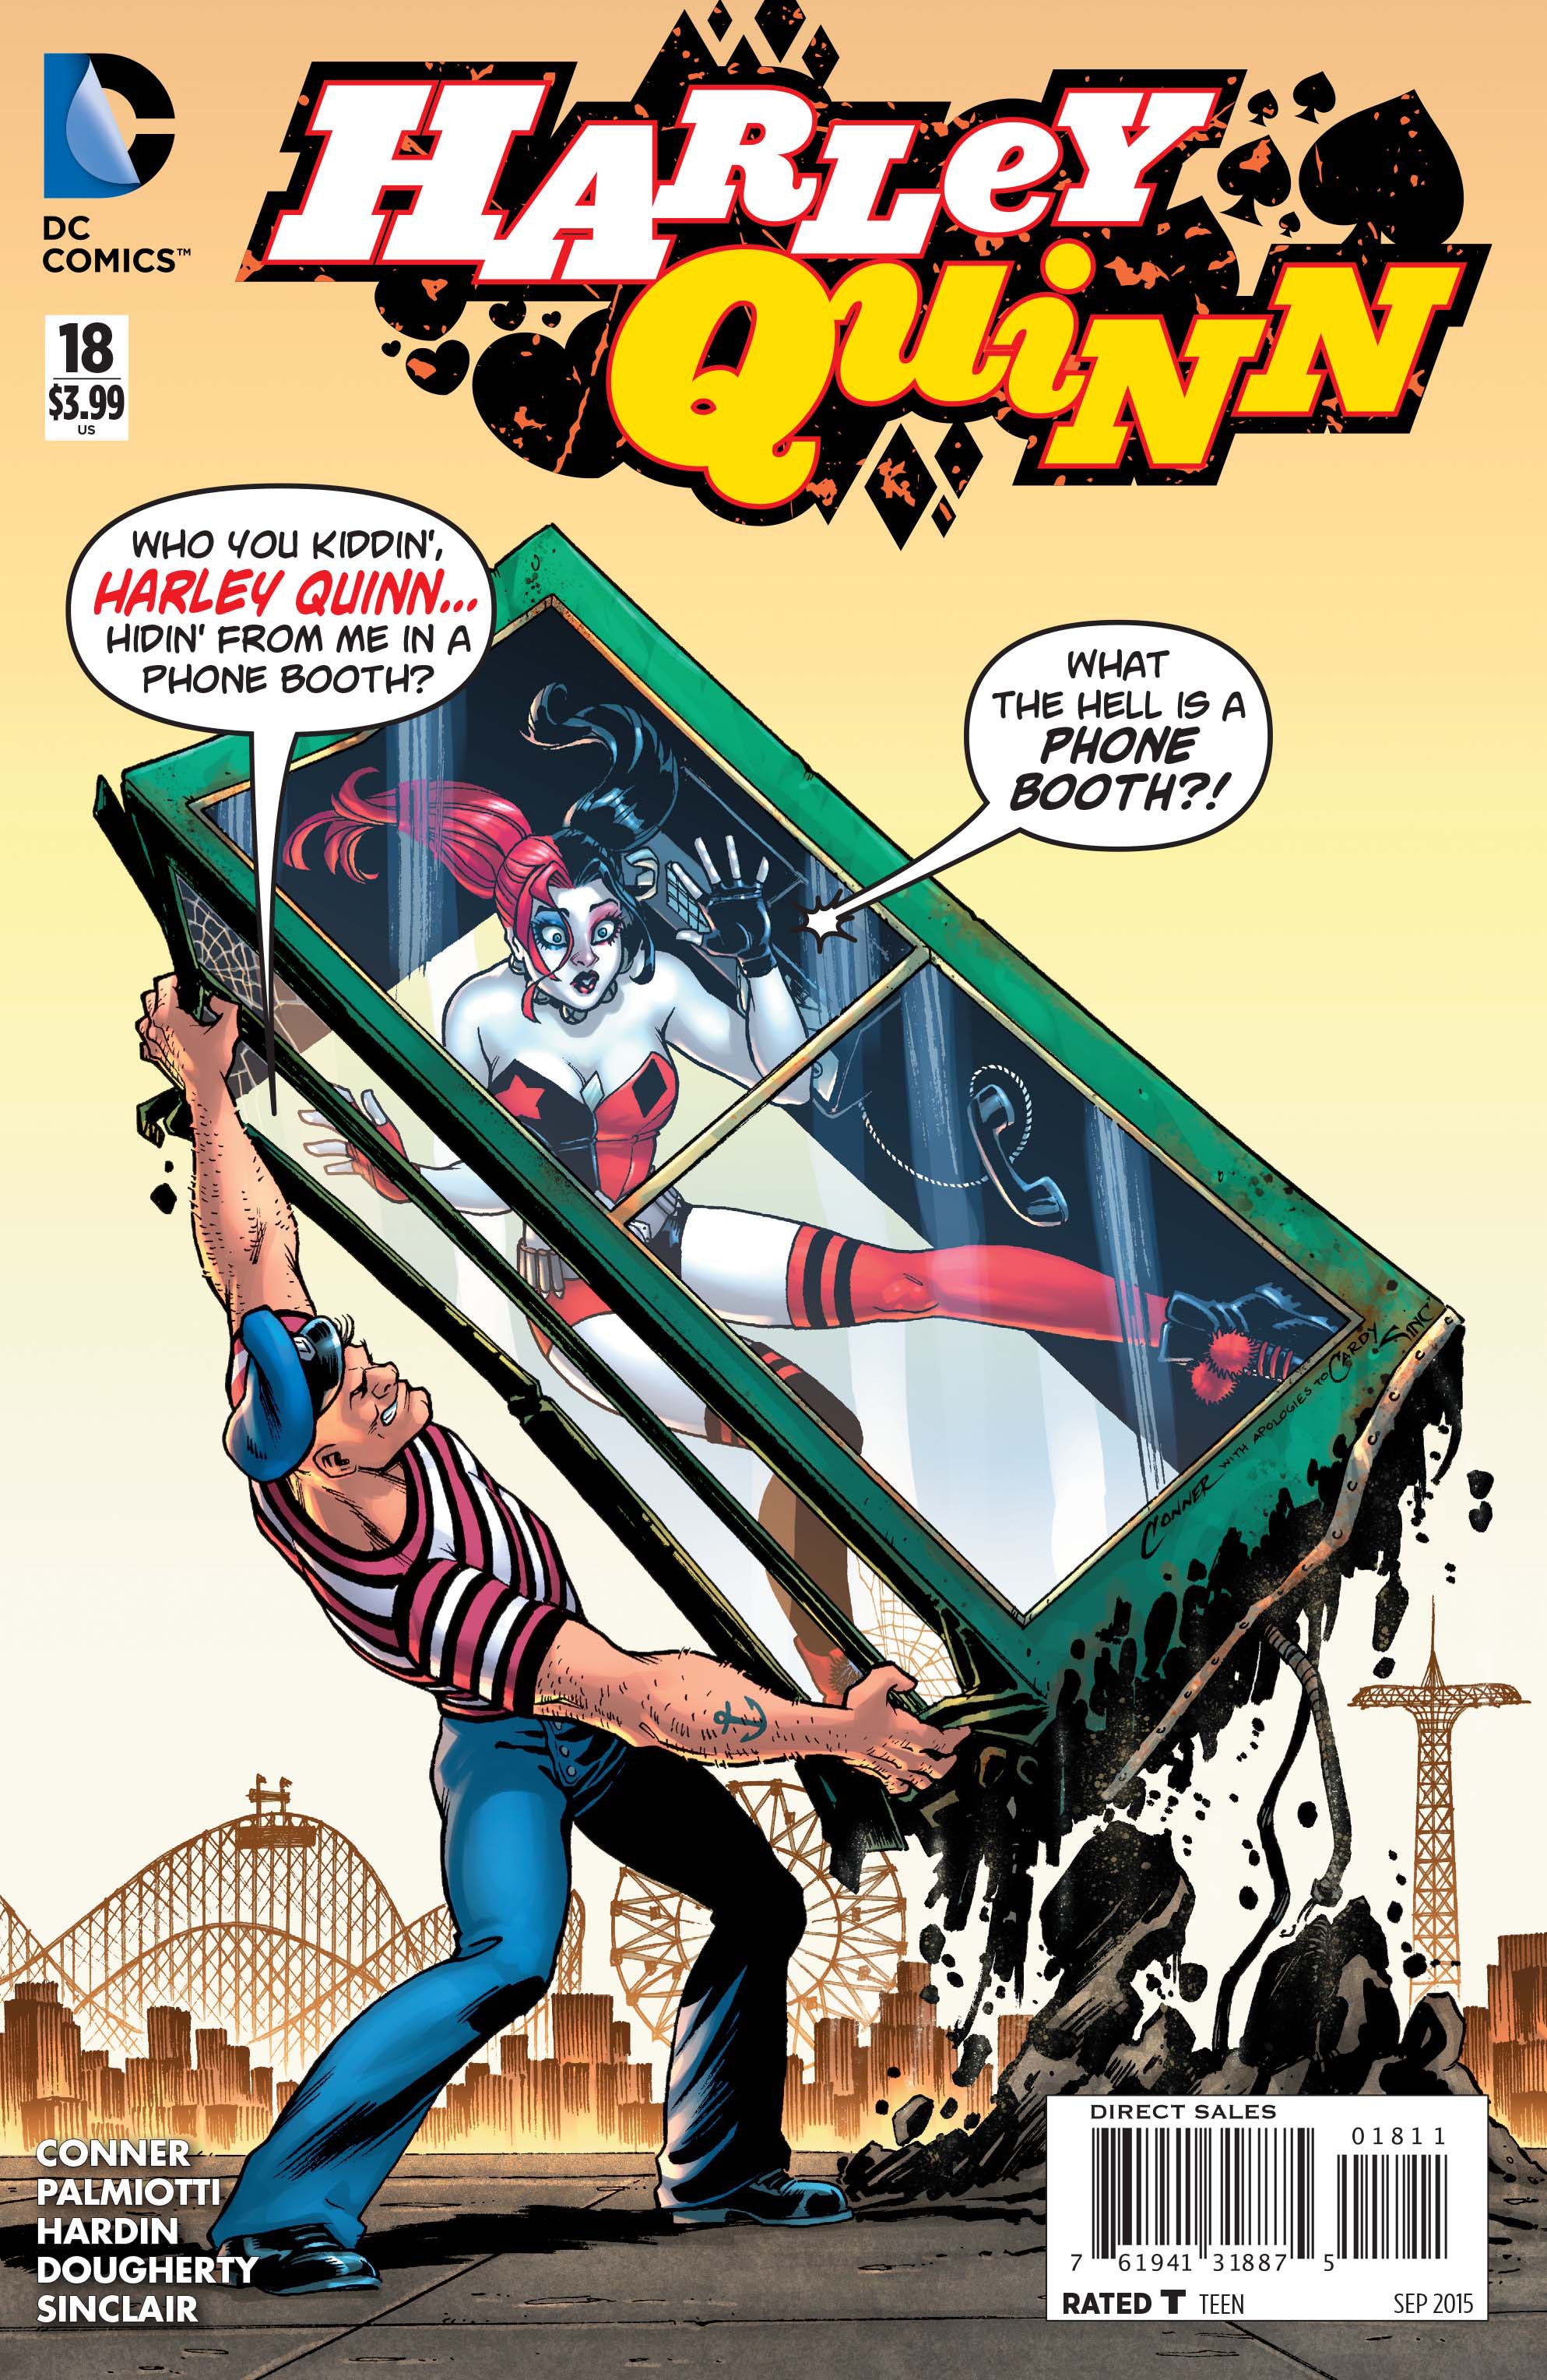 HARLEY QUINN Vol 2 #18 | Game Master's Emporium (The New GME)